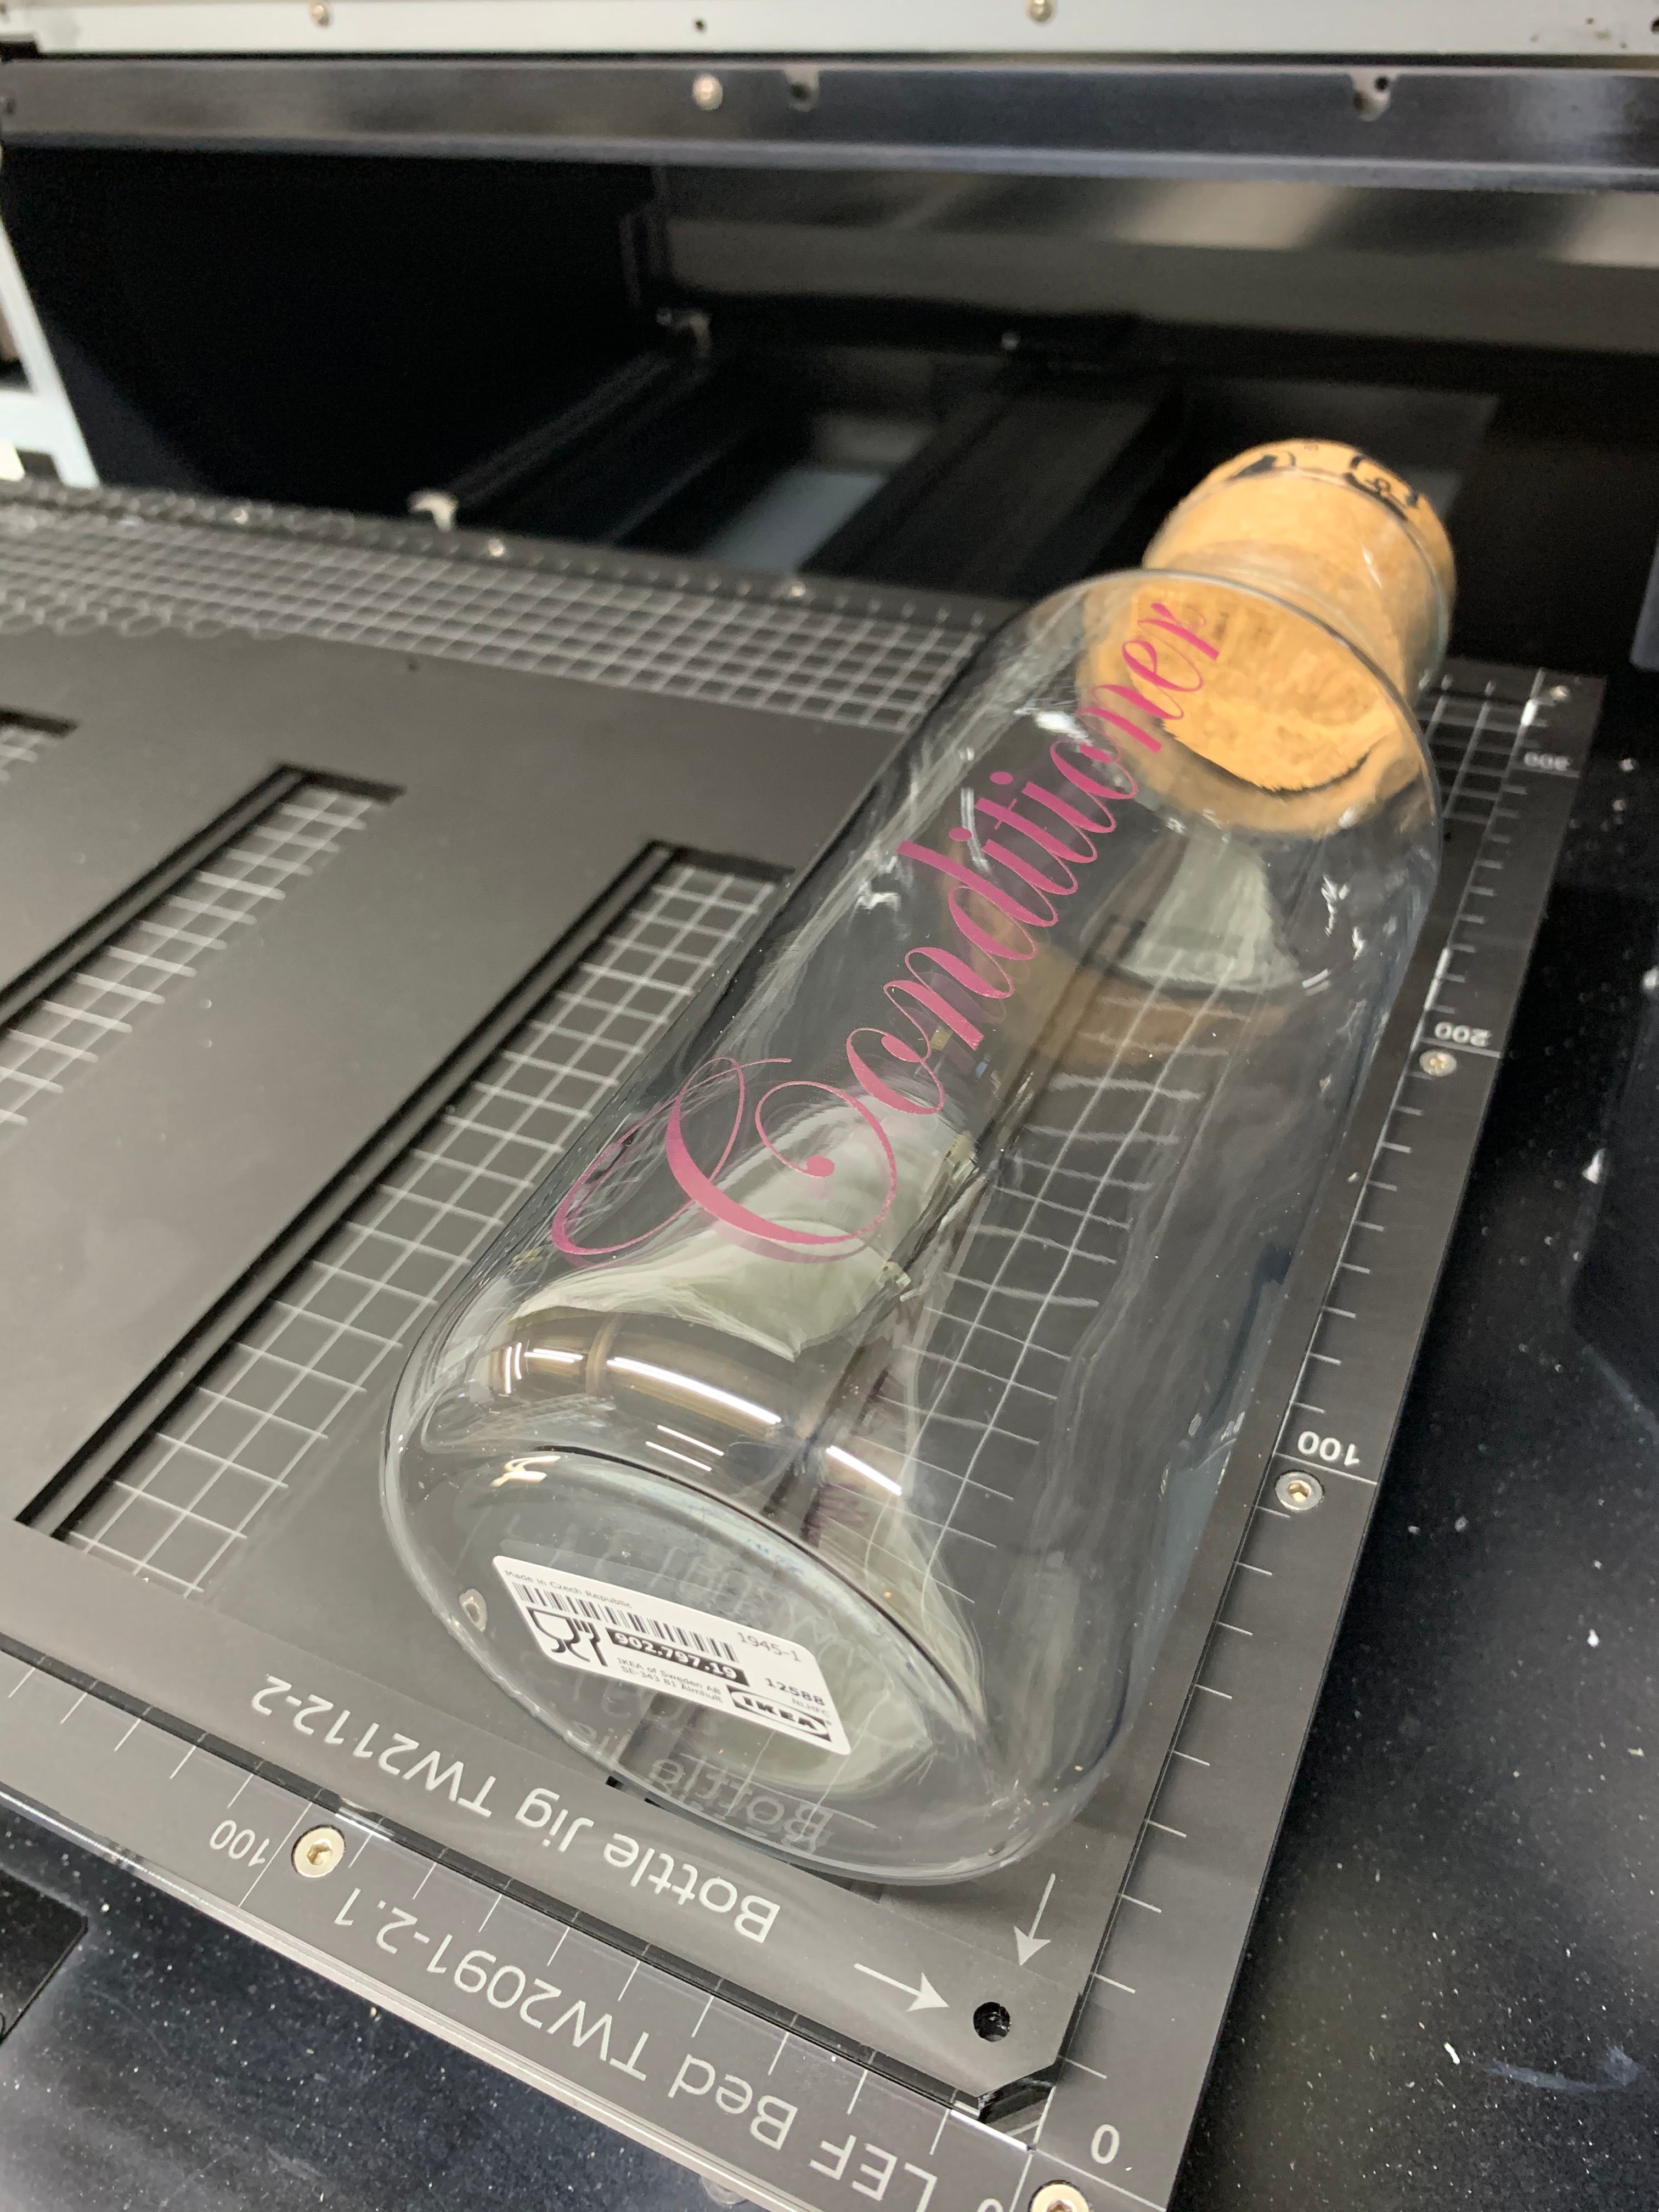 Corked Bottled Jig for Mimaki UJF-7151 Flatbed Printer (xx Spaces)